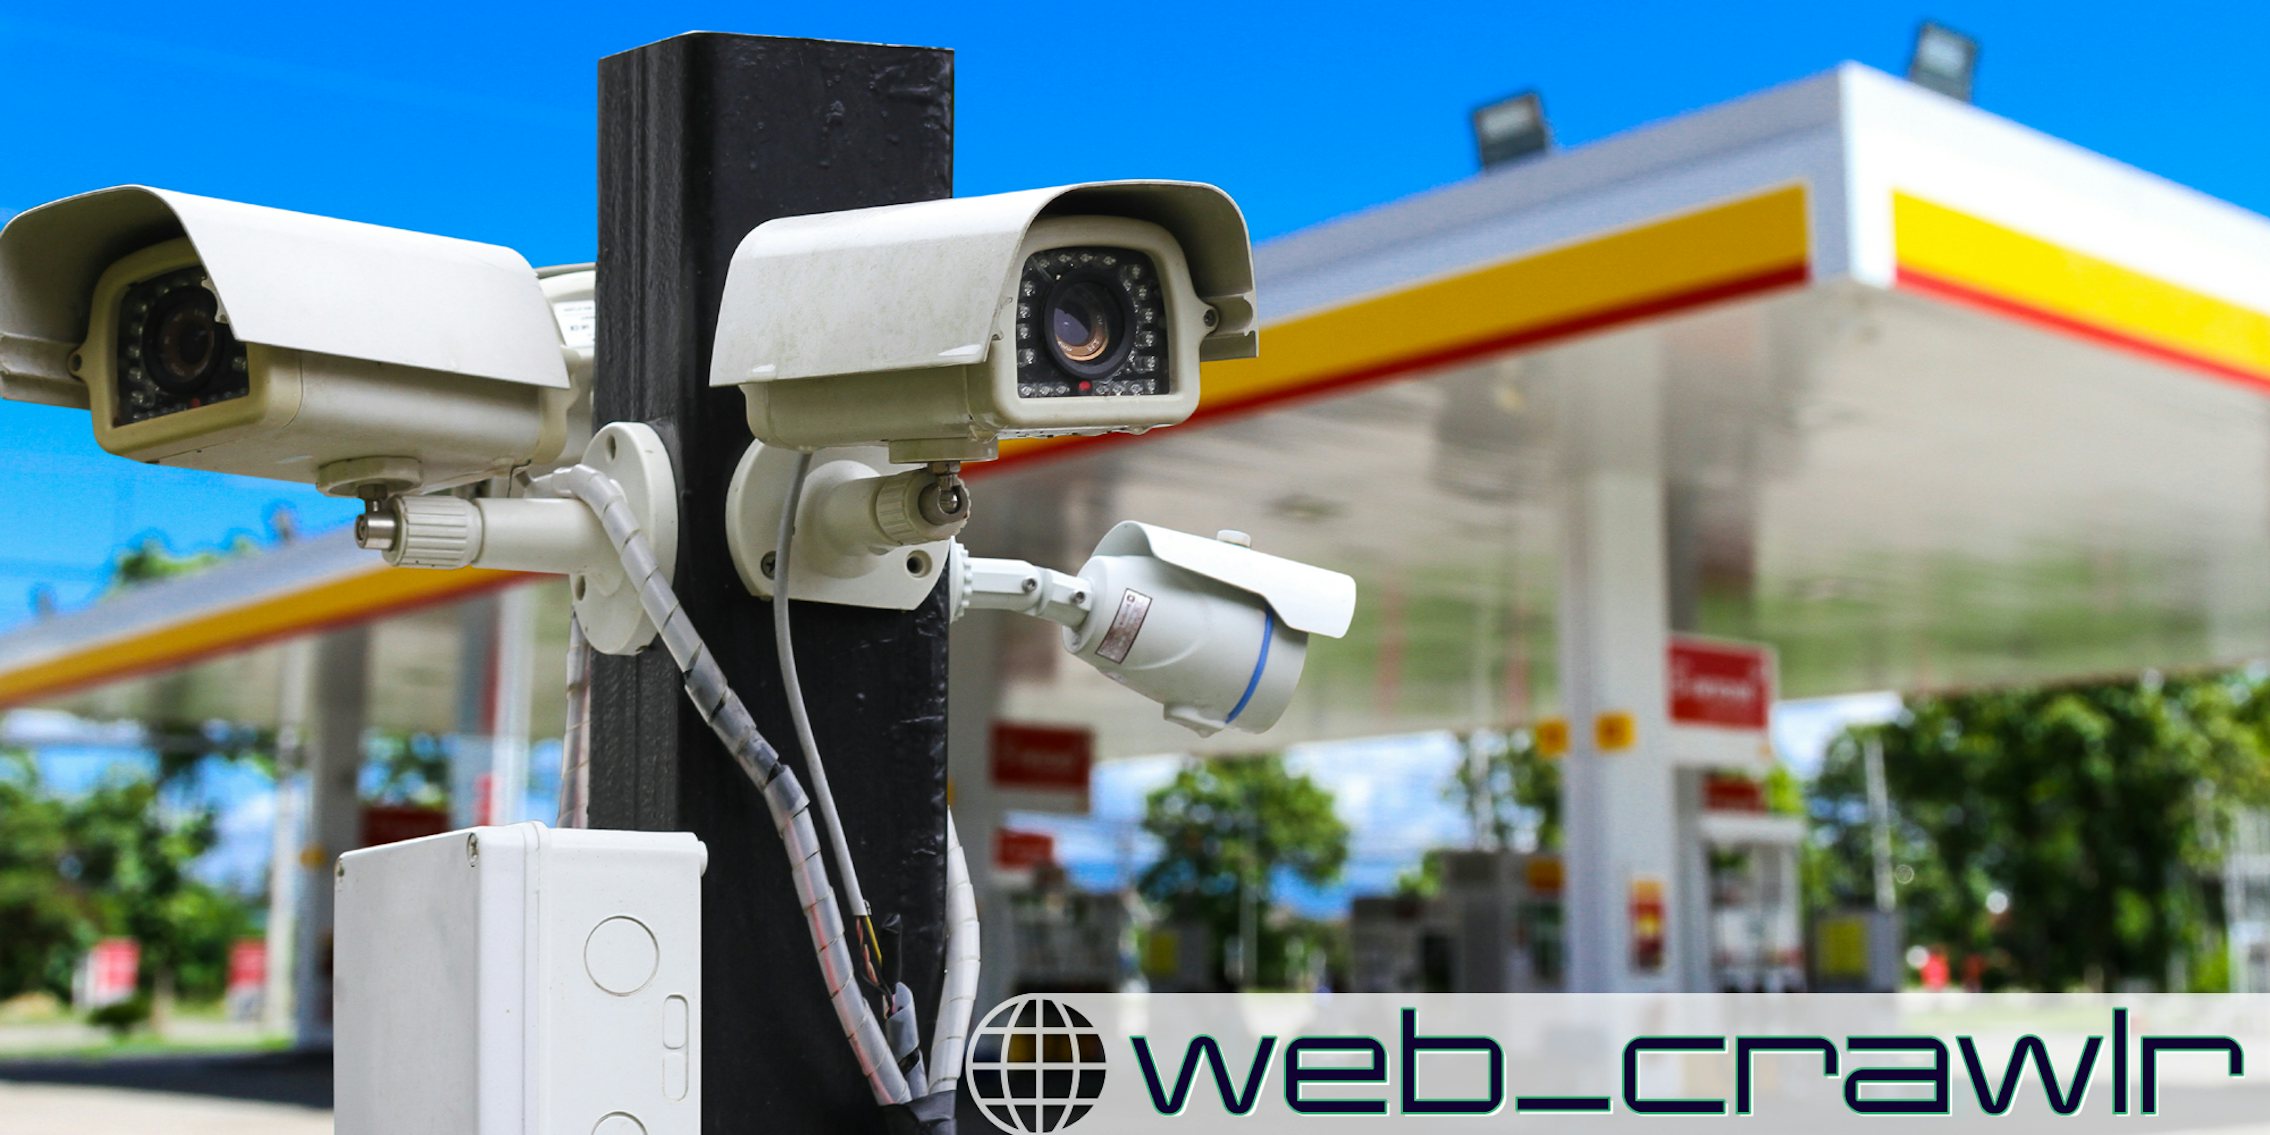 Cameras at a gas station. The Daily Dot newsletter web_crawlr logo is in the bottom right corner.